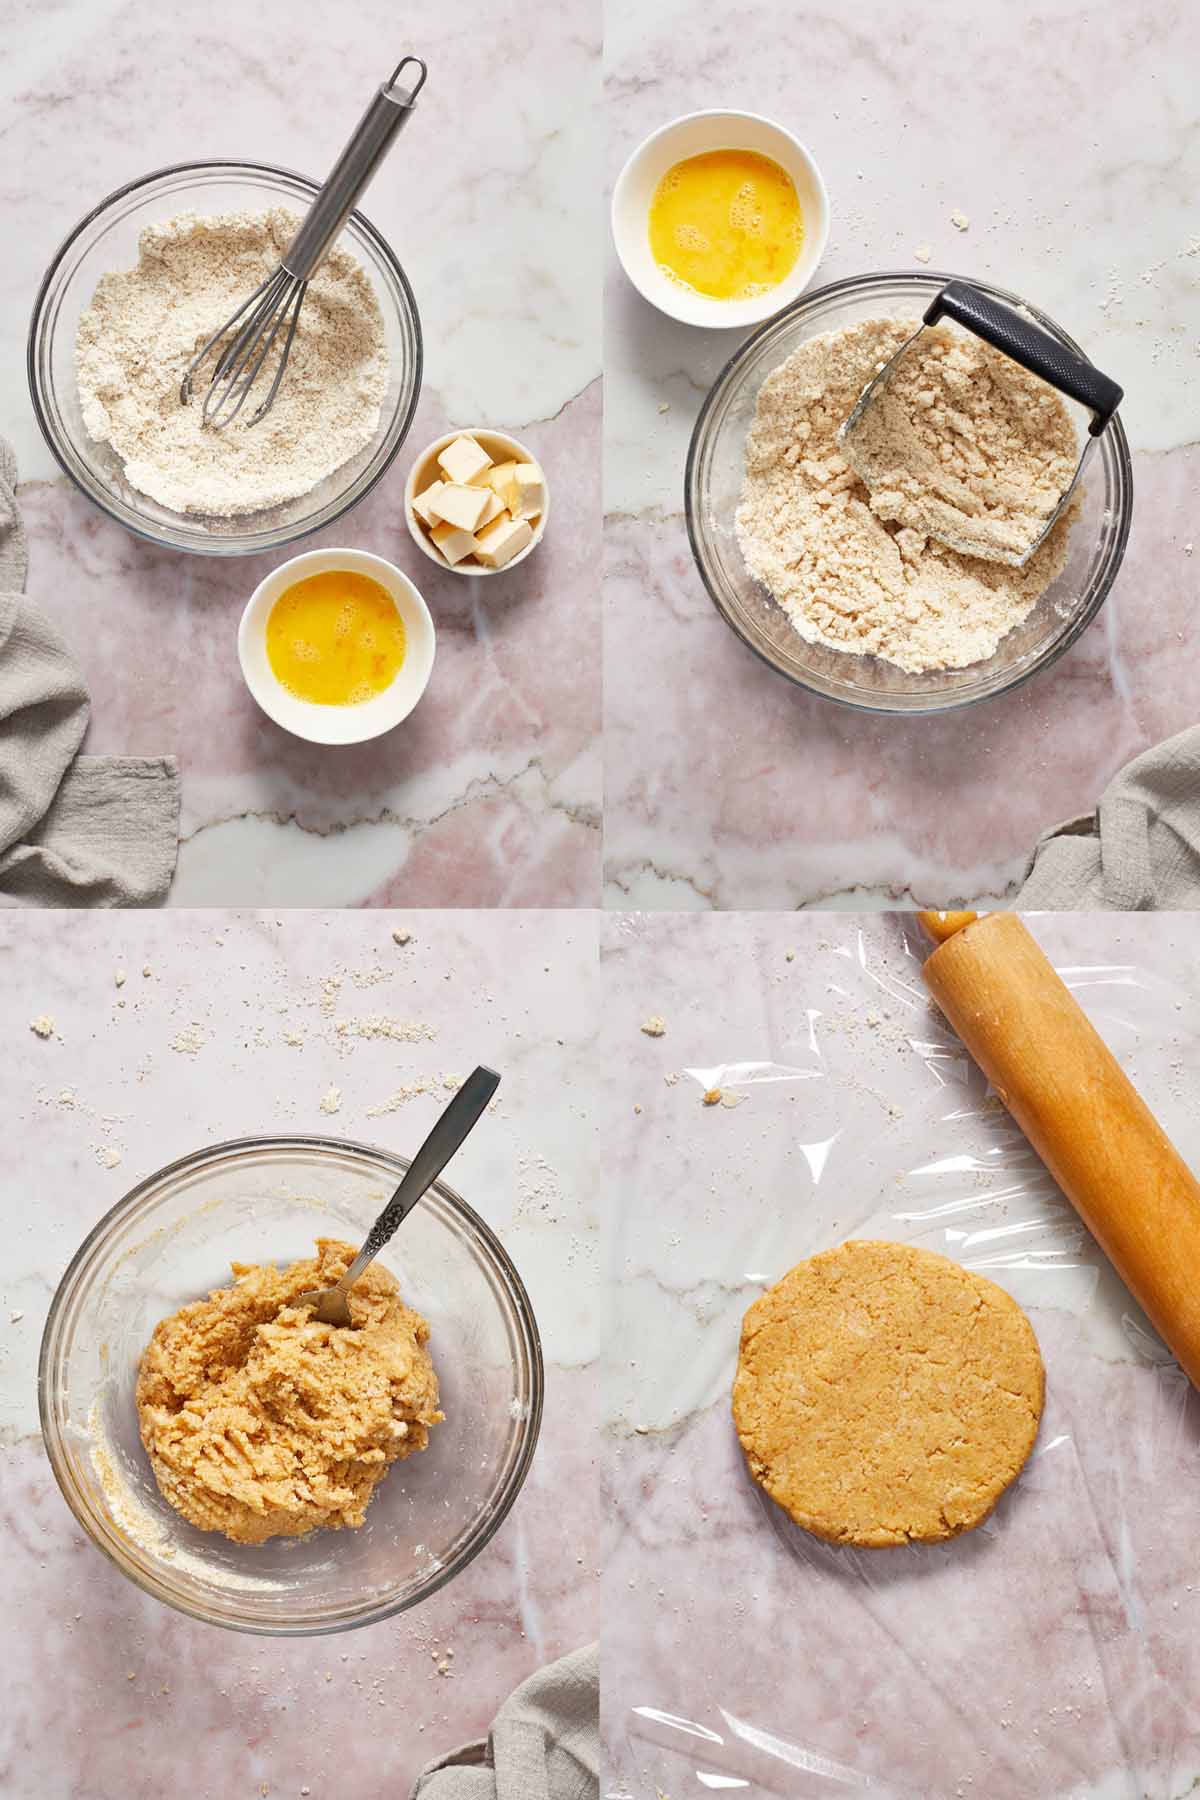 Collage of 4 images showing how the almond flour galette crust is made.